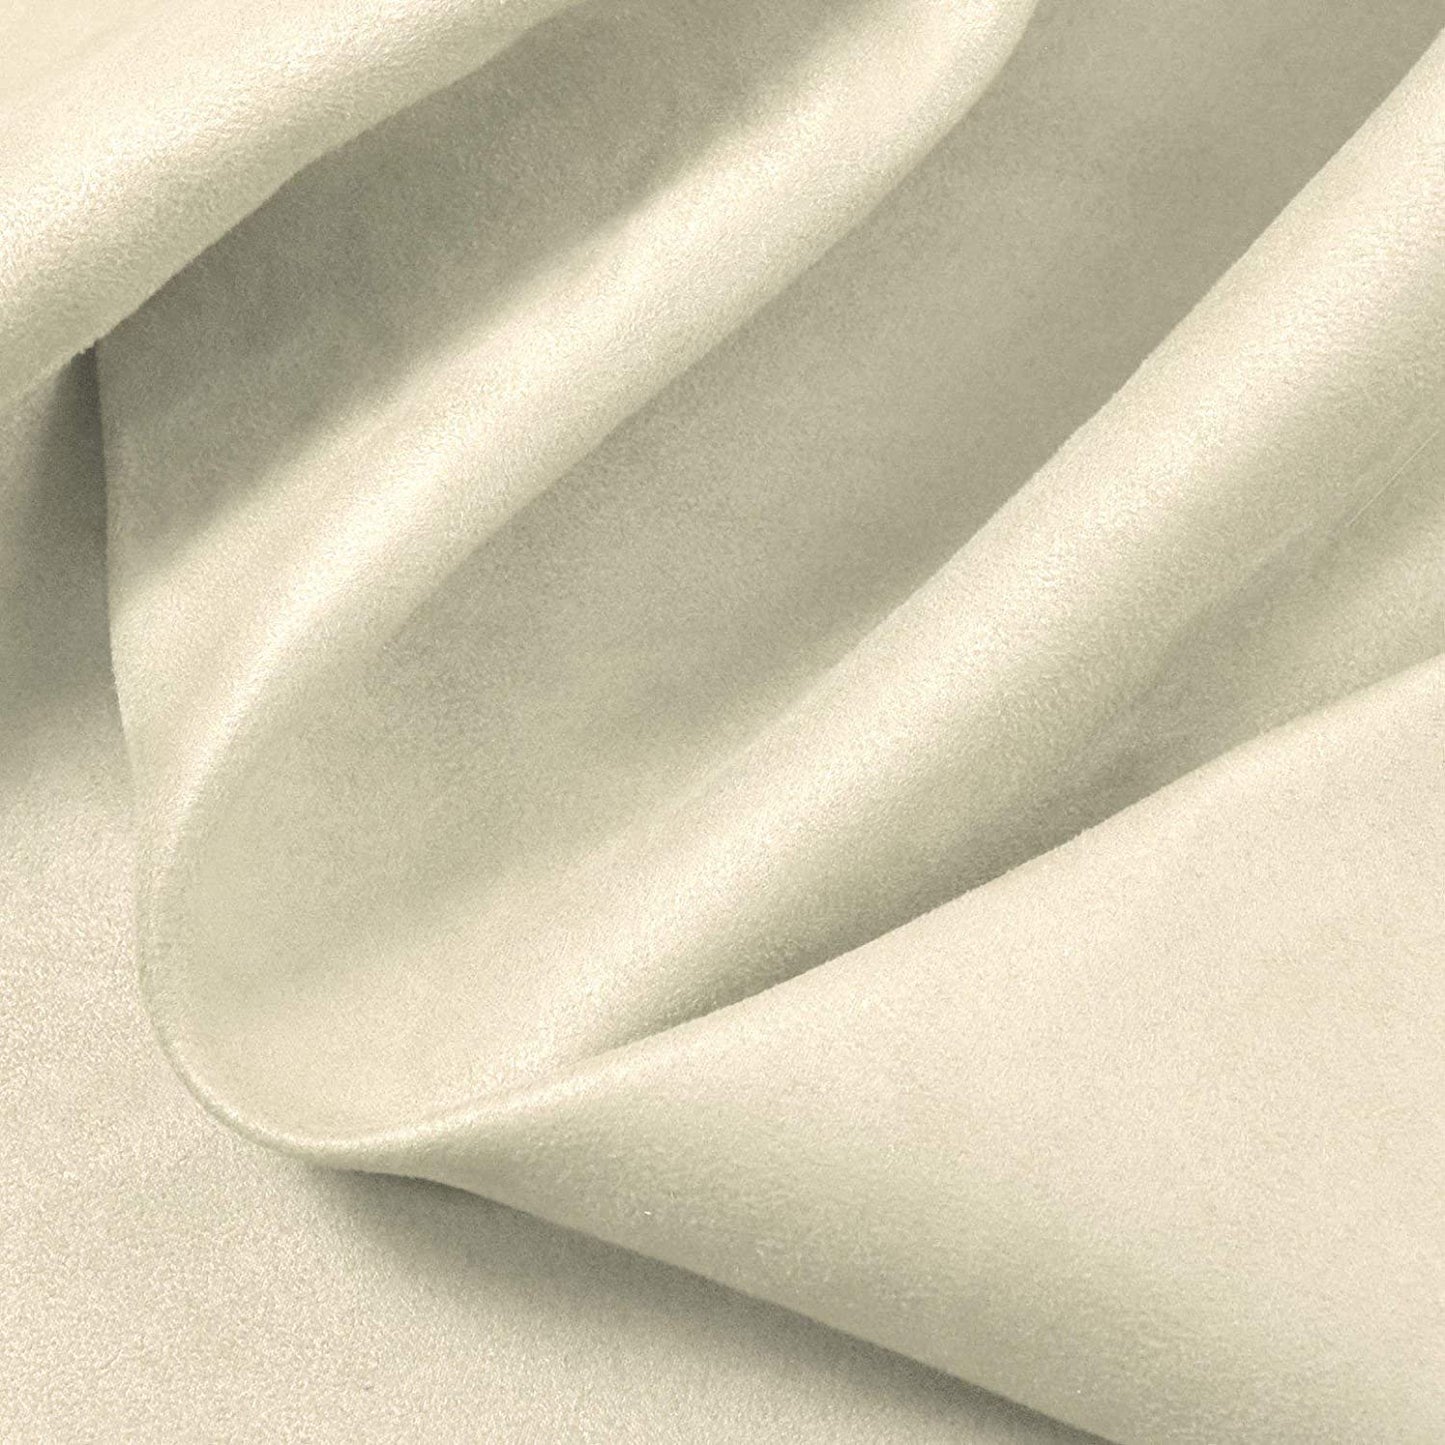 Ivory Suede Microsuede Fabric Upholstery Drapery Fabric (10 yards)